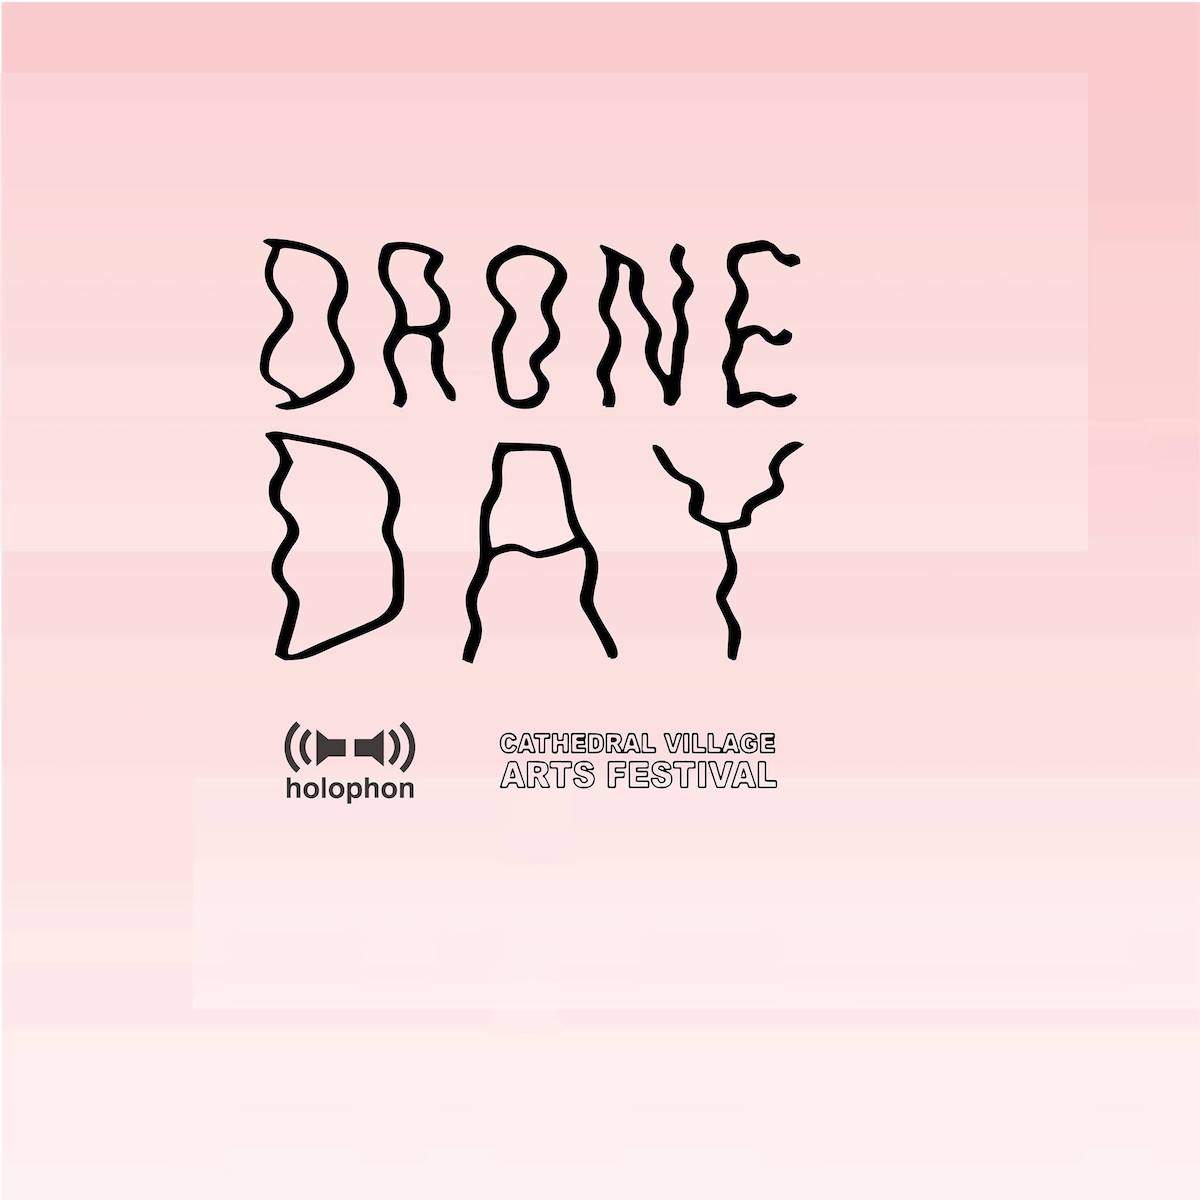 Inverted volume symbols with the text 'holophon' underneath and squiggly text 'DRONE DAY'